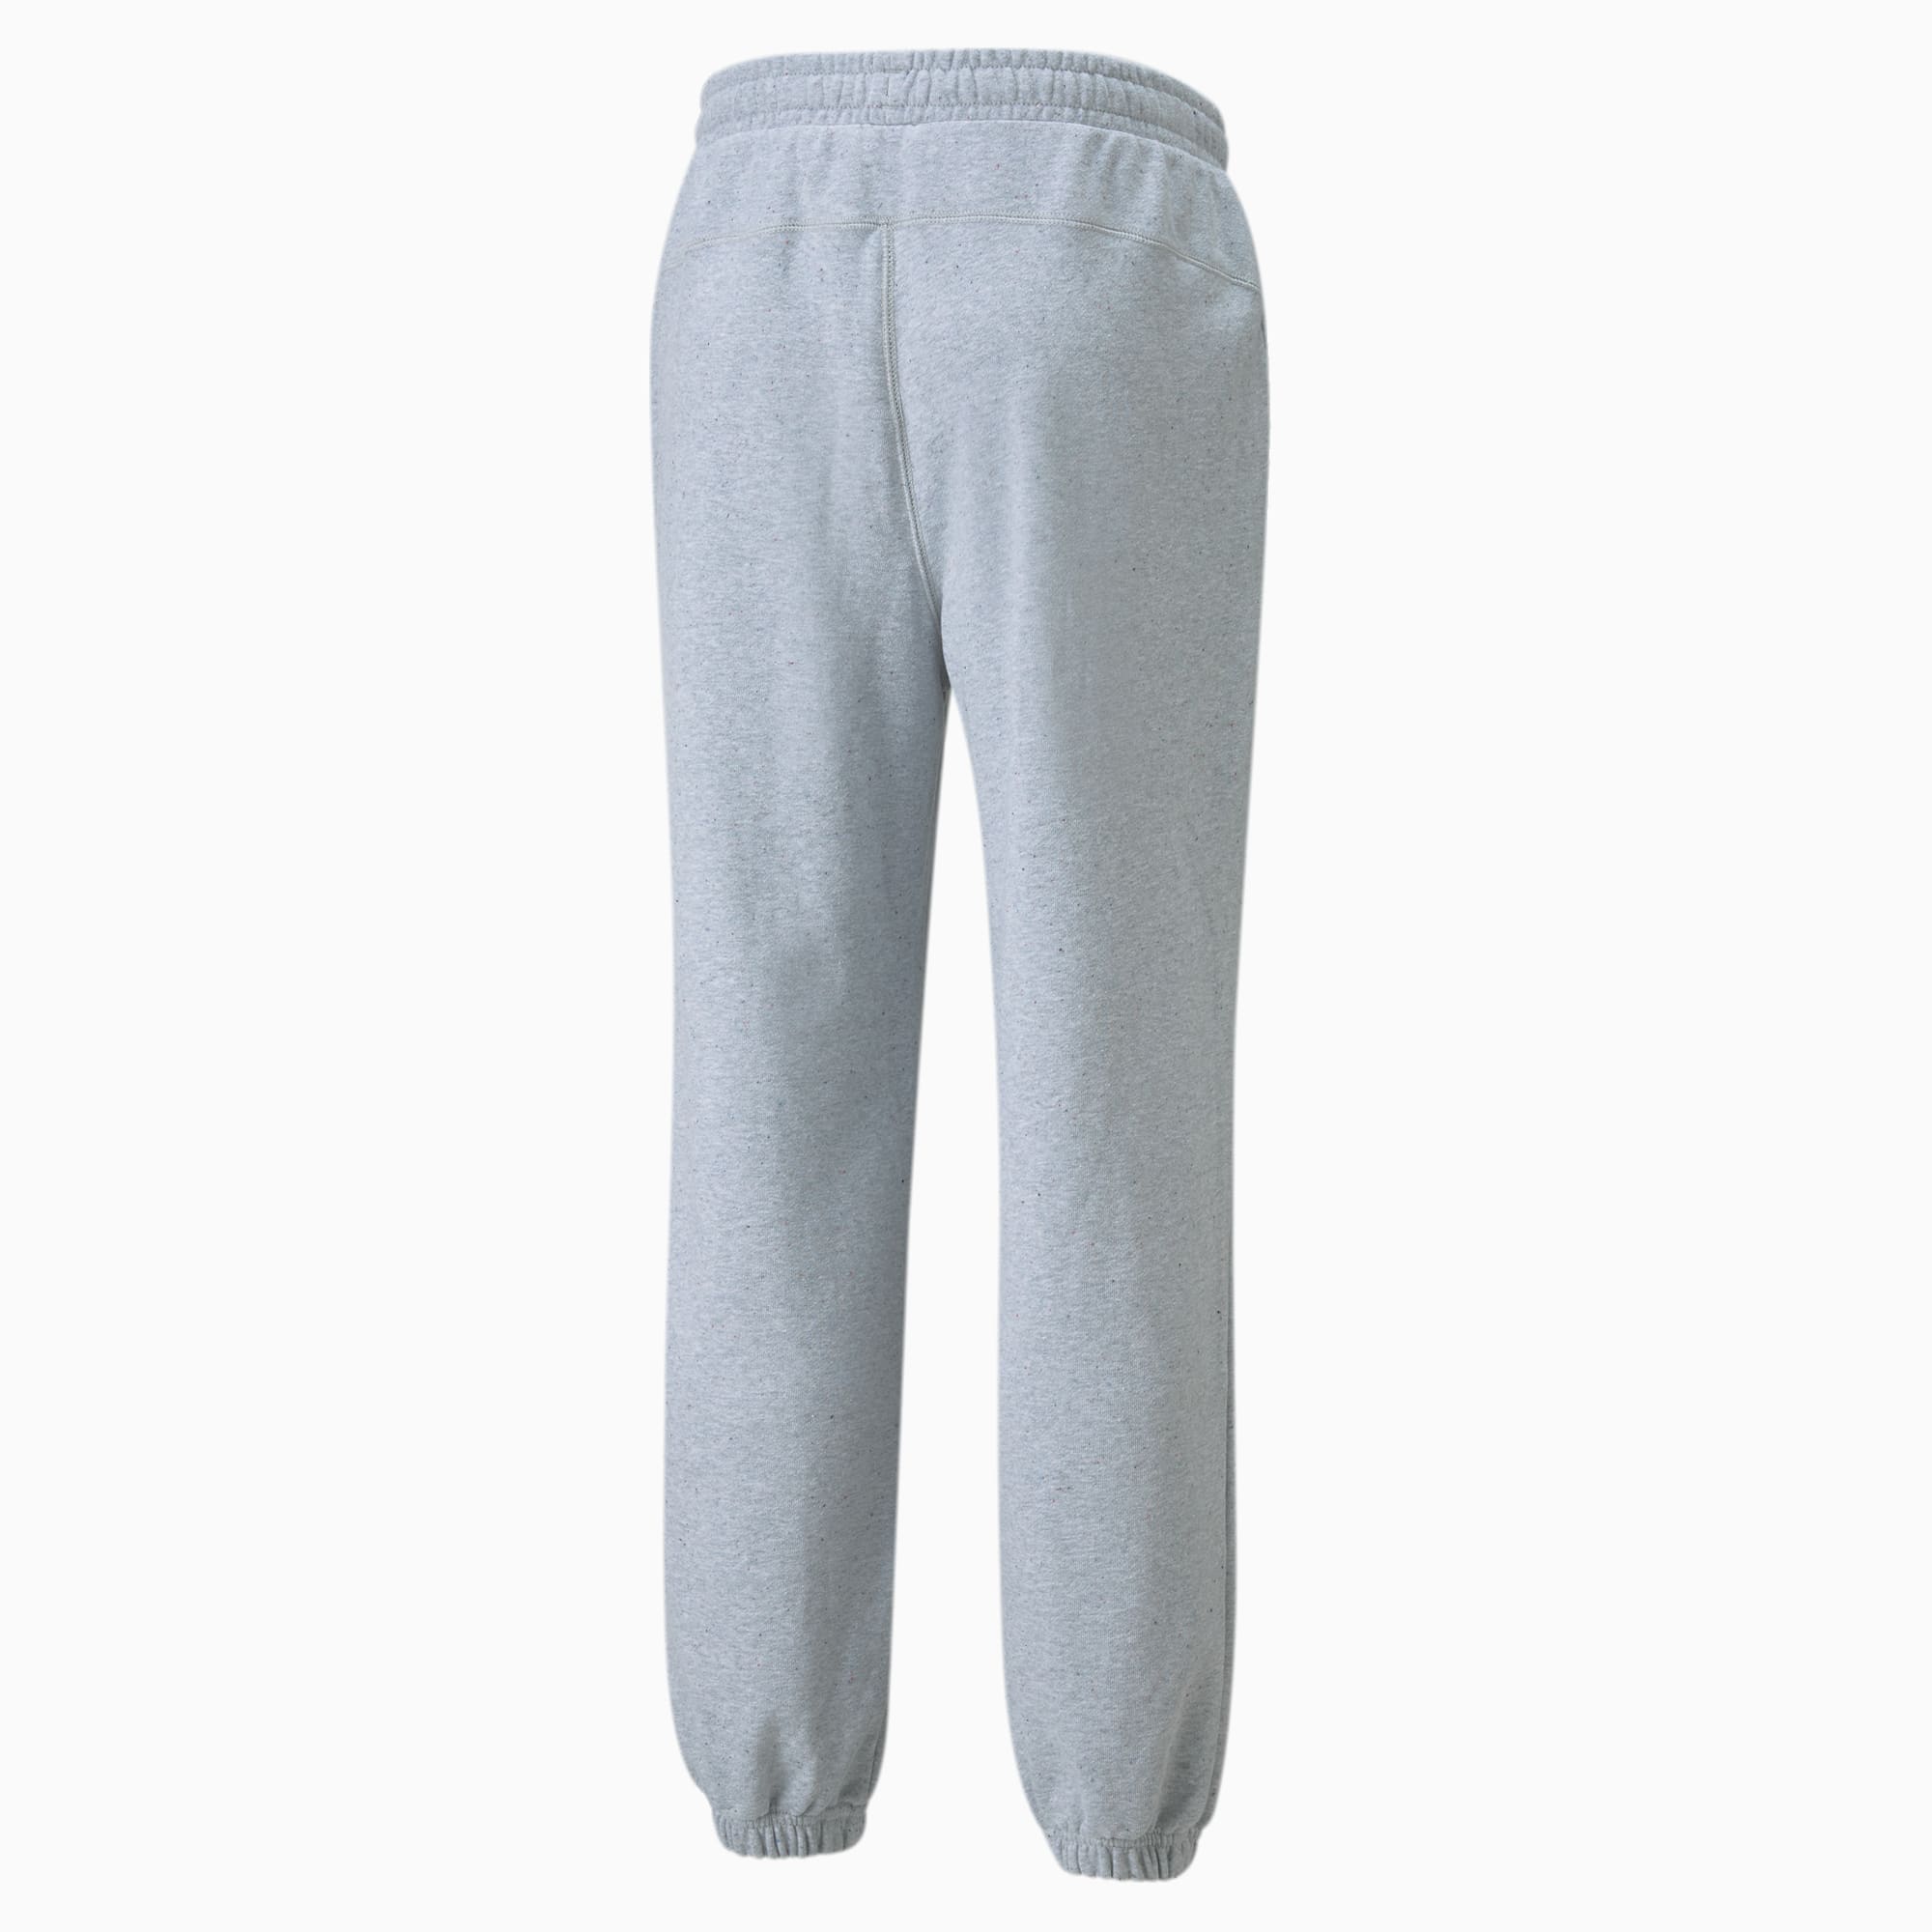 RE:Collection Relaxed | PUMA Pants Men\'s